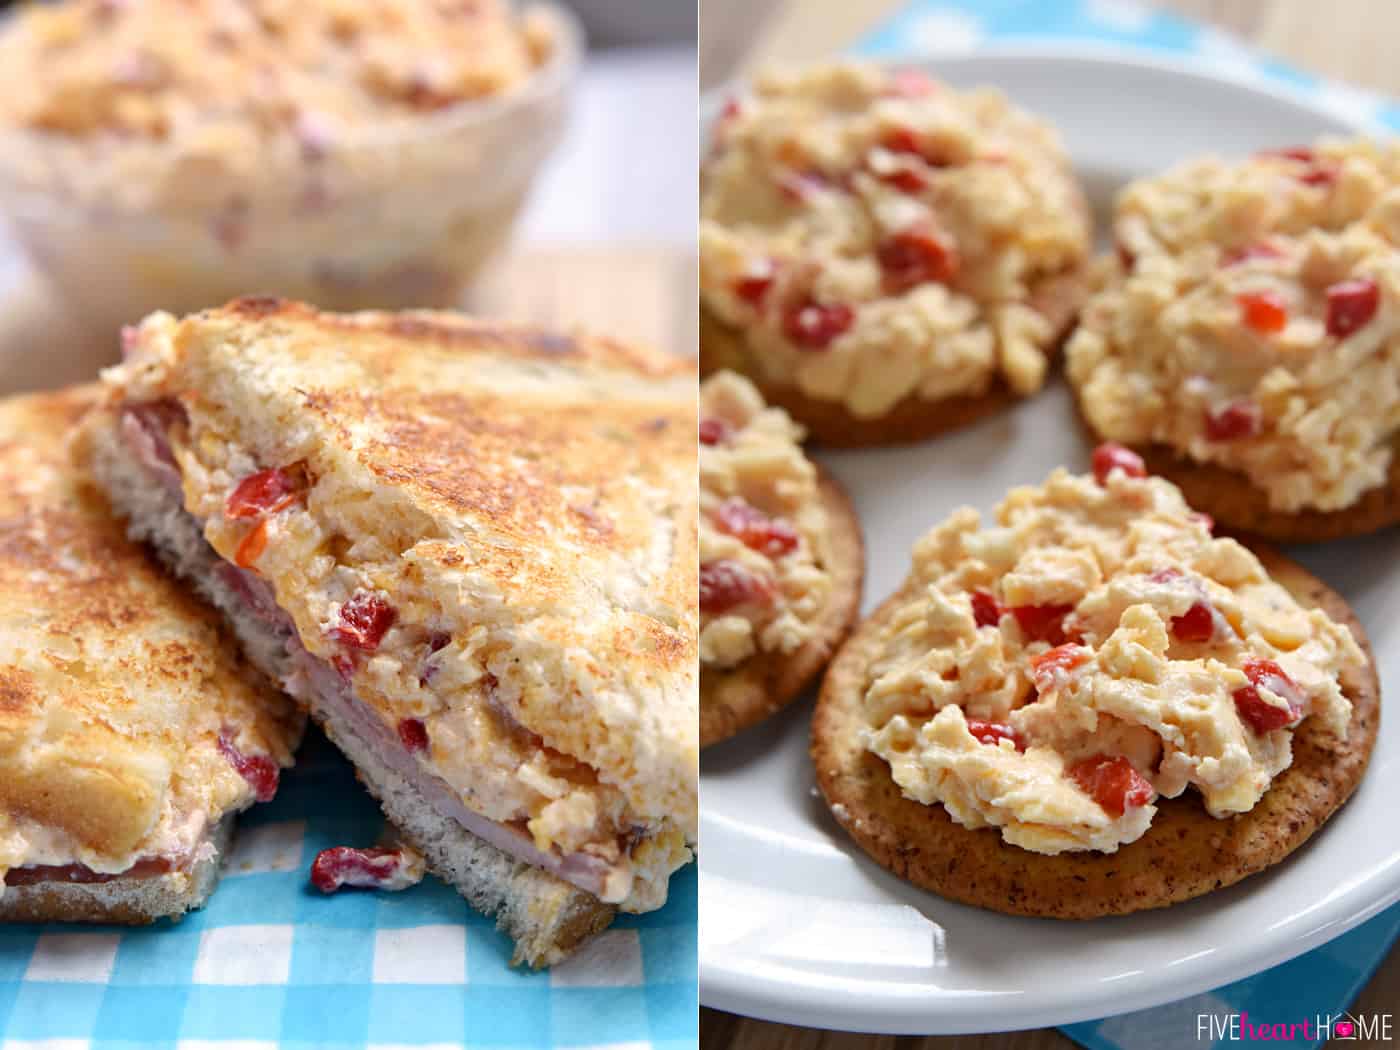 Homemade pimento cheese as a sandwich and on crackers.